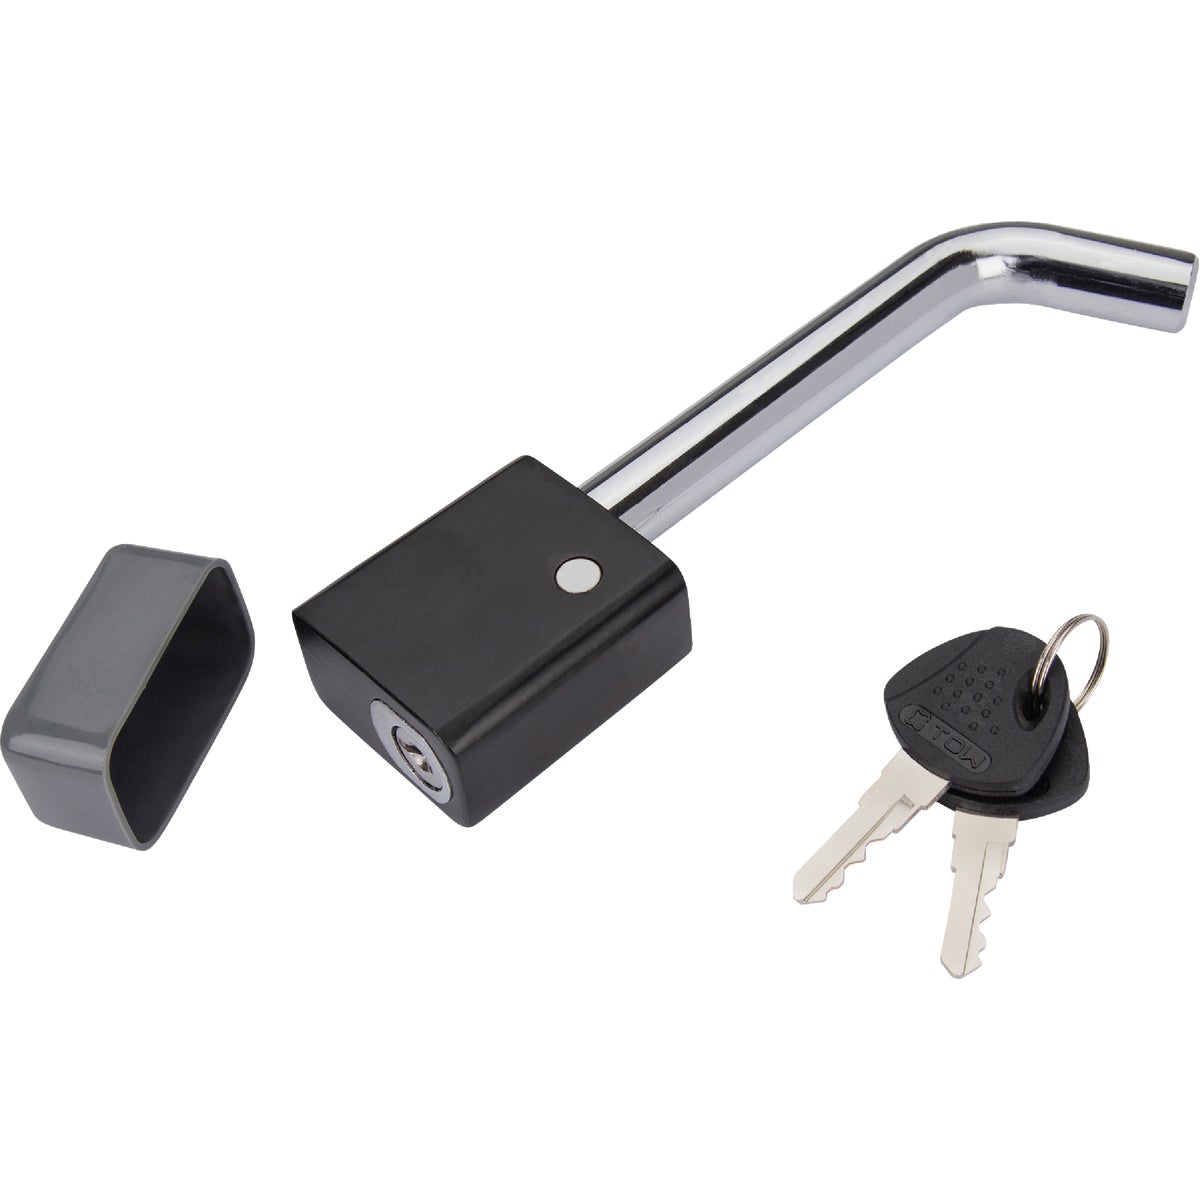 Item 573361, The Steel Receiver Lock protects your boats, campers, trailers, equipment, 